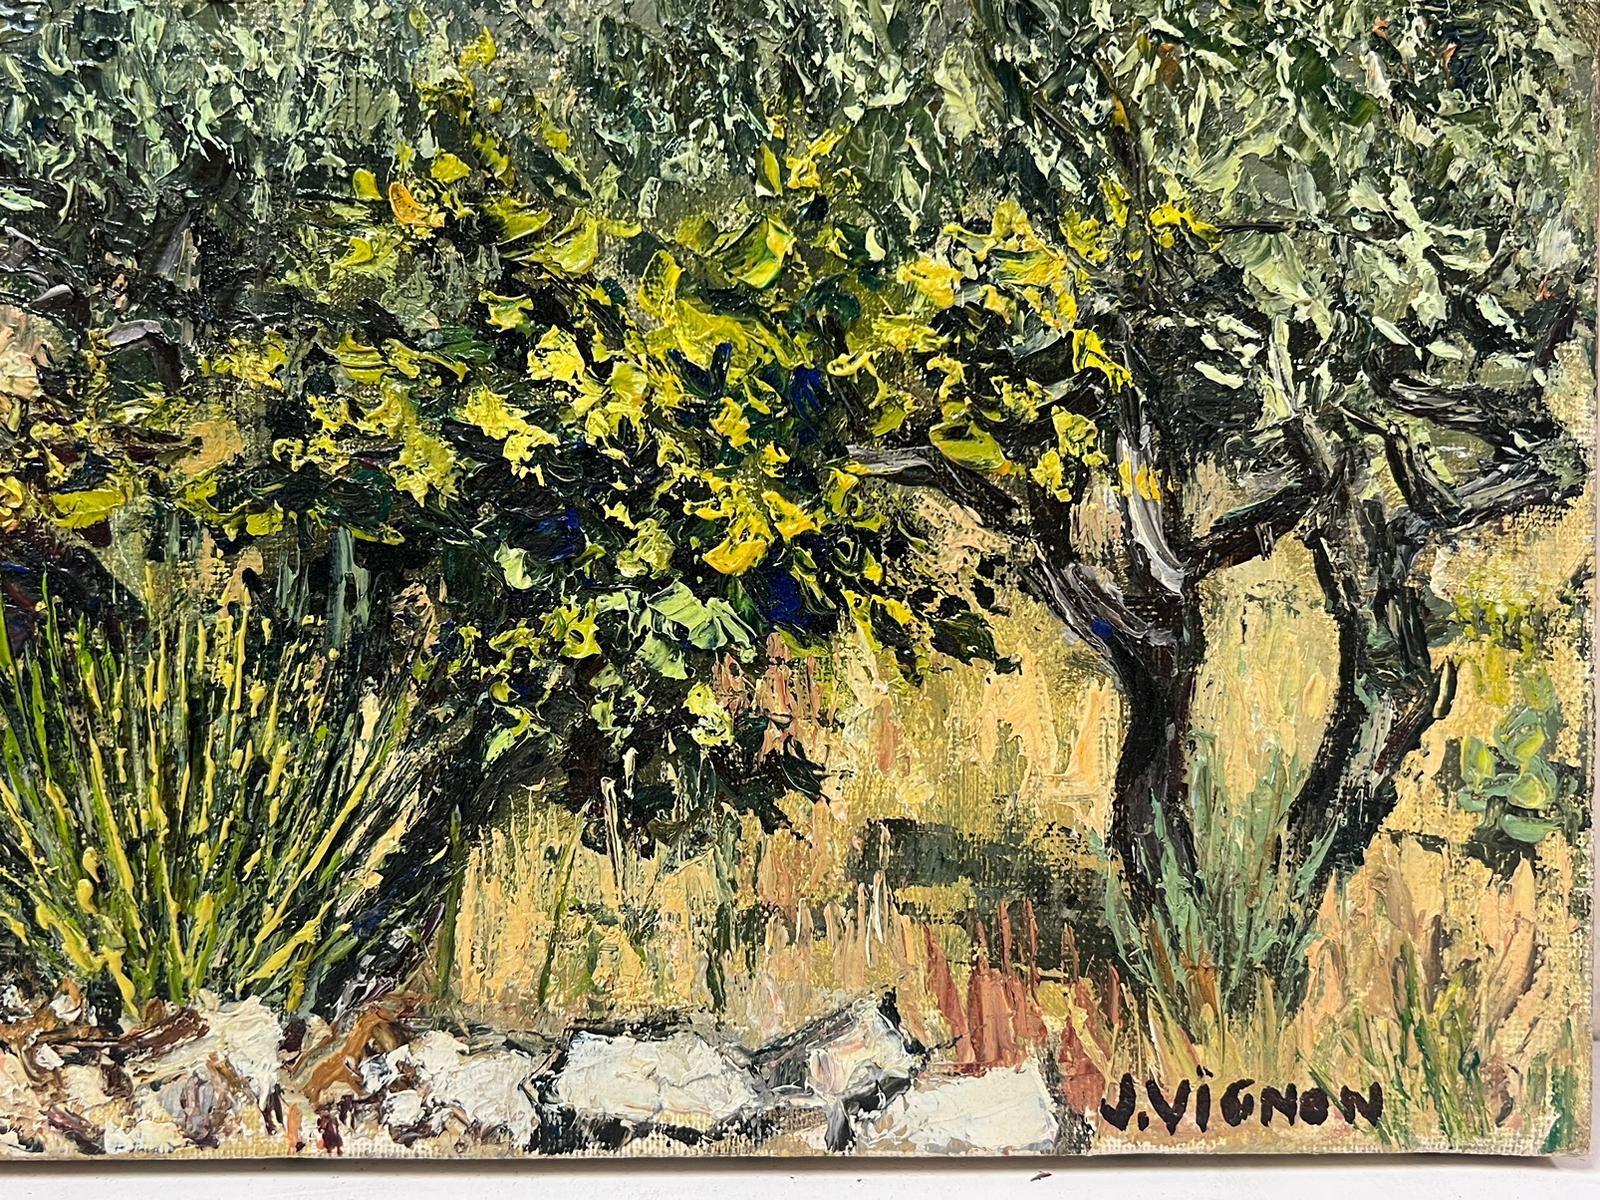 La Garrigue
by Josine Vignon (French 1922-2022) 
signed oil painting on canvas, unframed
canvas: 10.5 x 15.5 inches
inscribed verso
very good condition 
provenance: from the artists estate, France

Josine Vignon (1922-2022) was a French artist